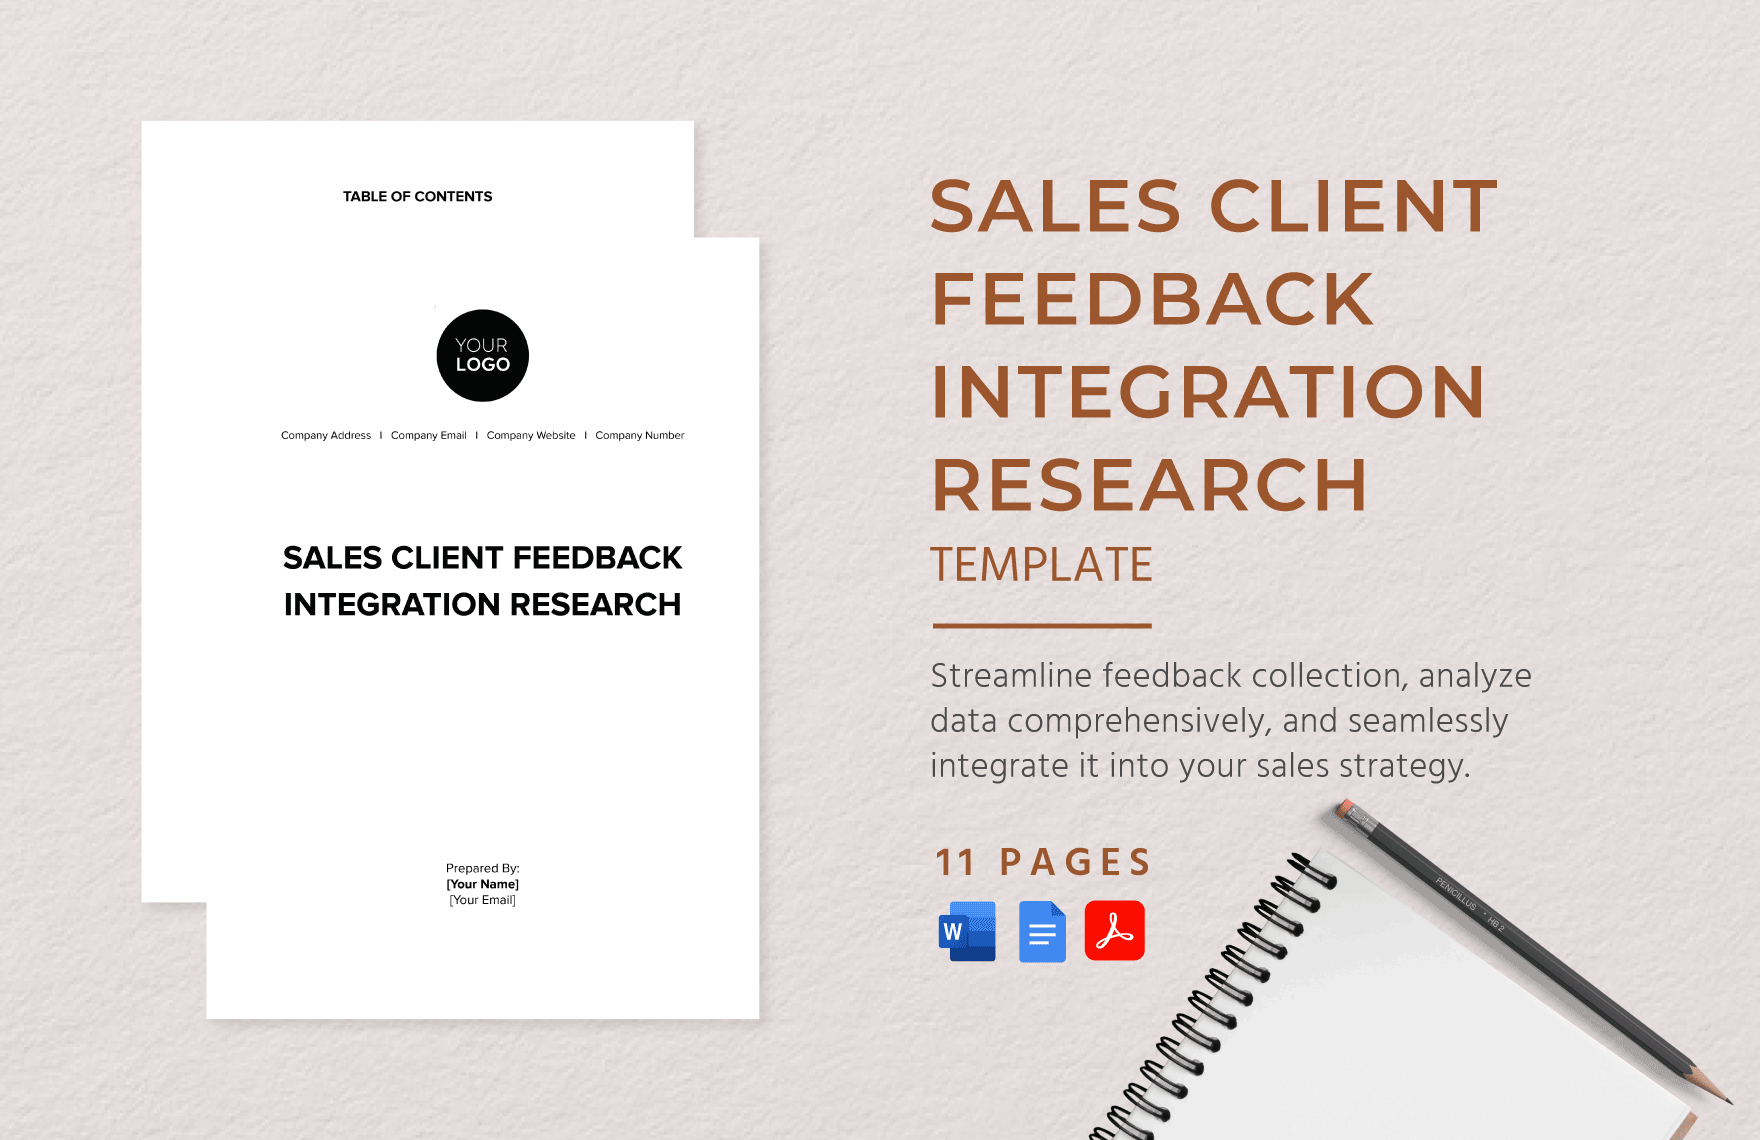 Sales Client Feedback Integration Research Template